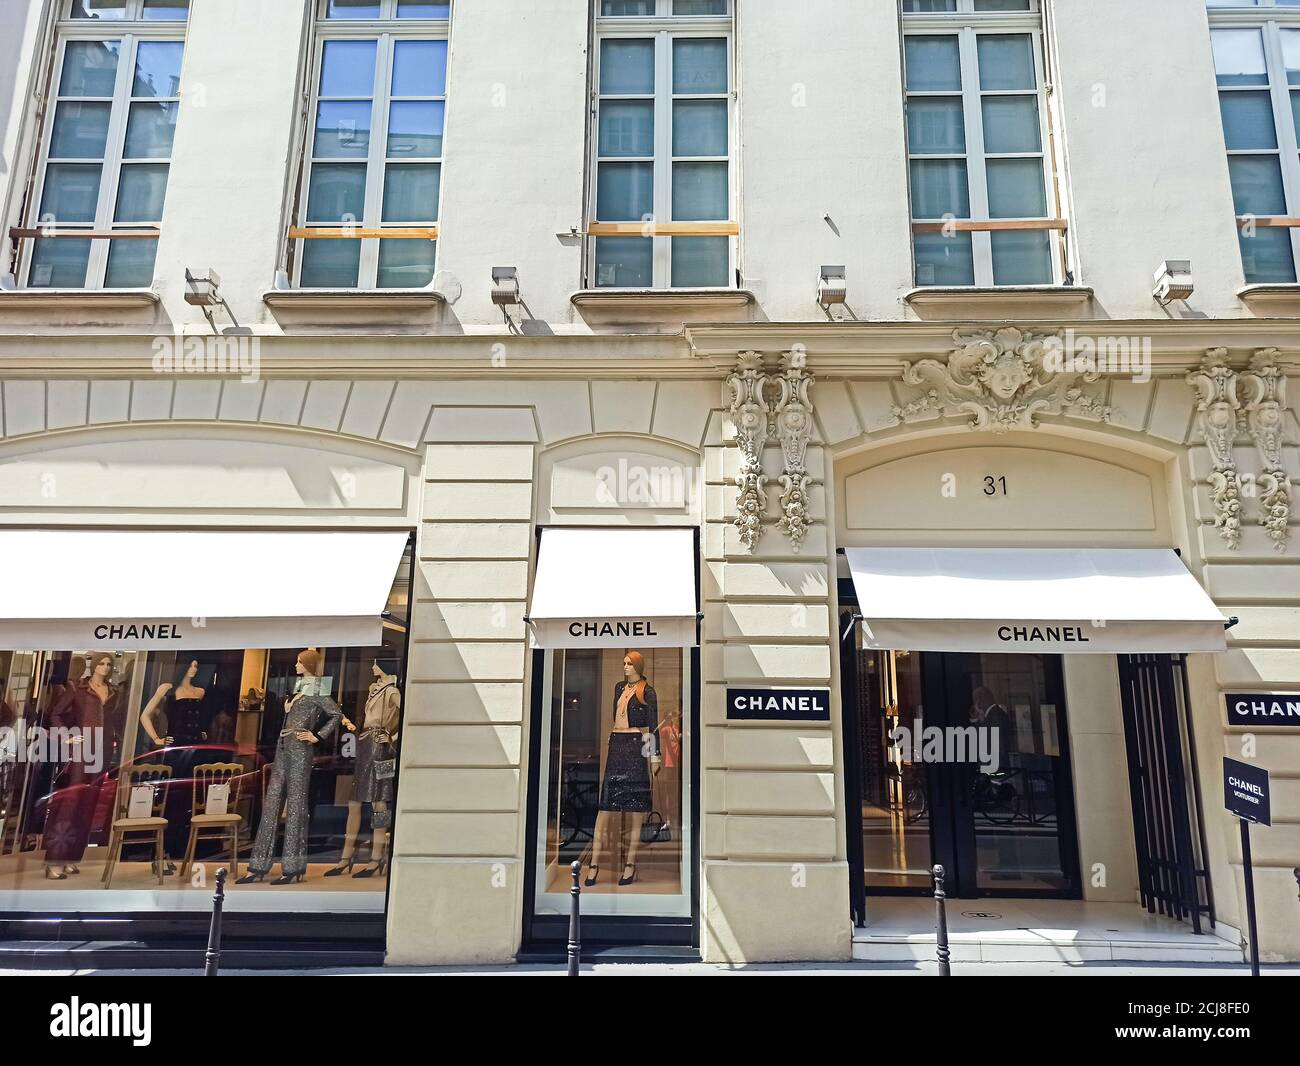 Siege stribe Pearly facade of the Chanel store in Paris Stock Photo - Alamy